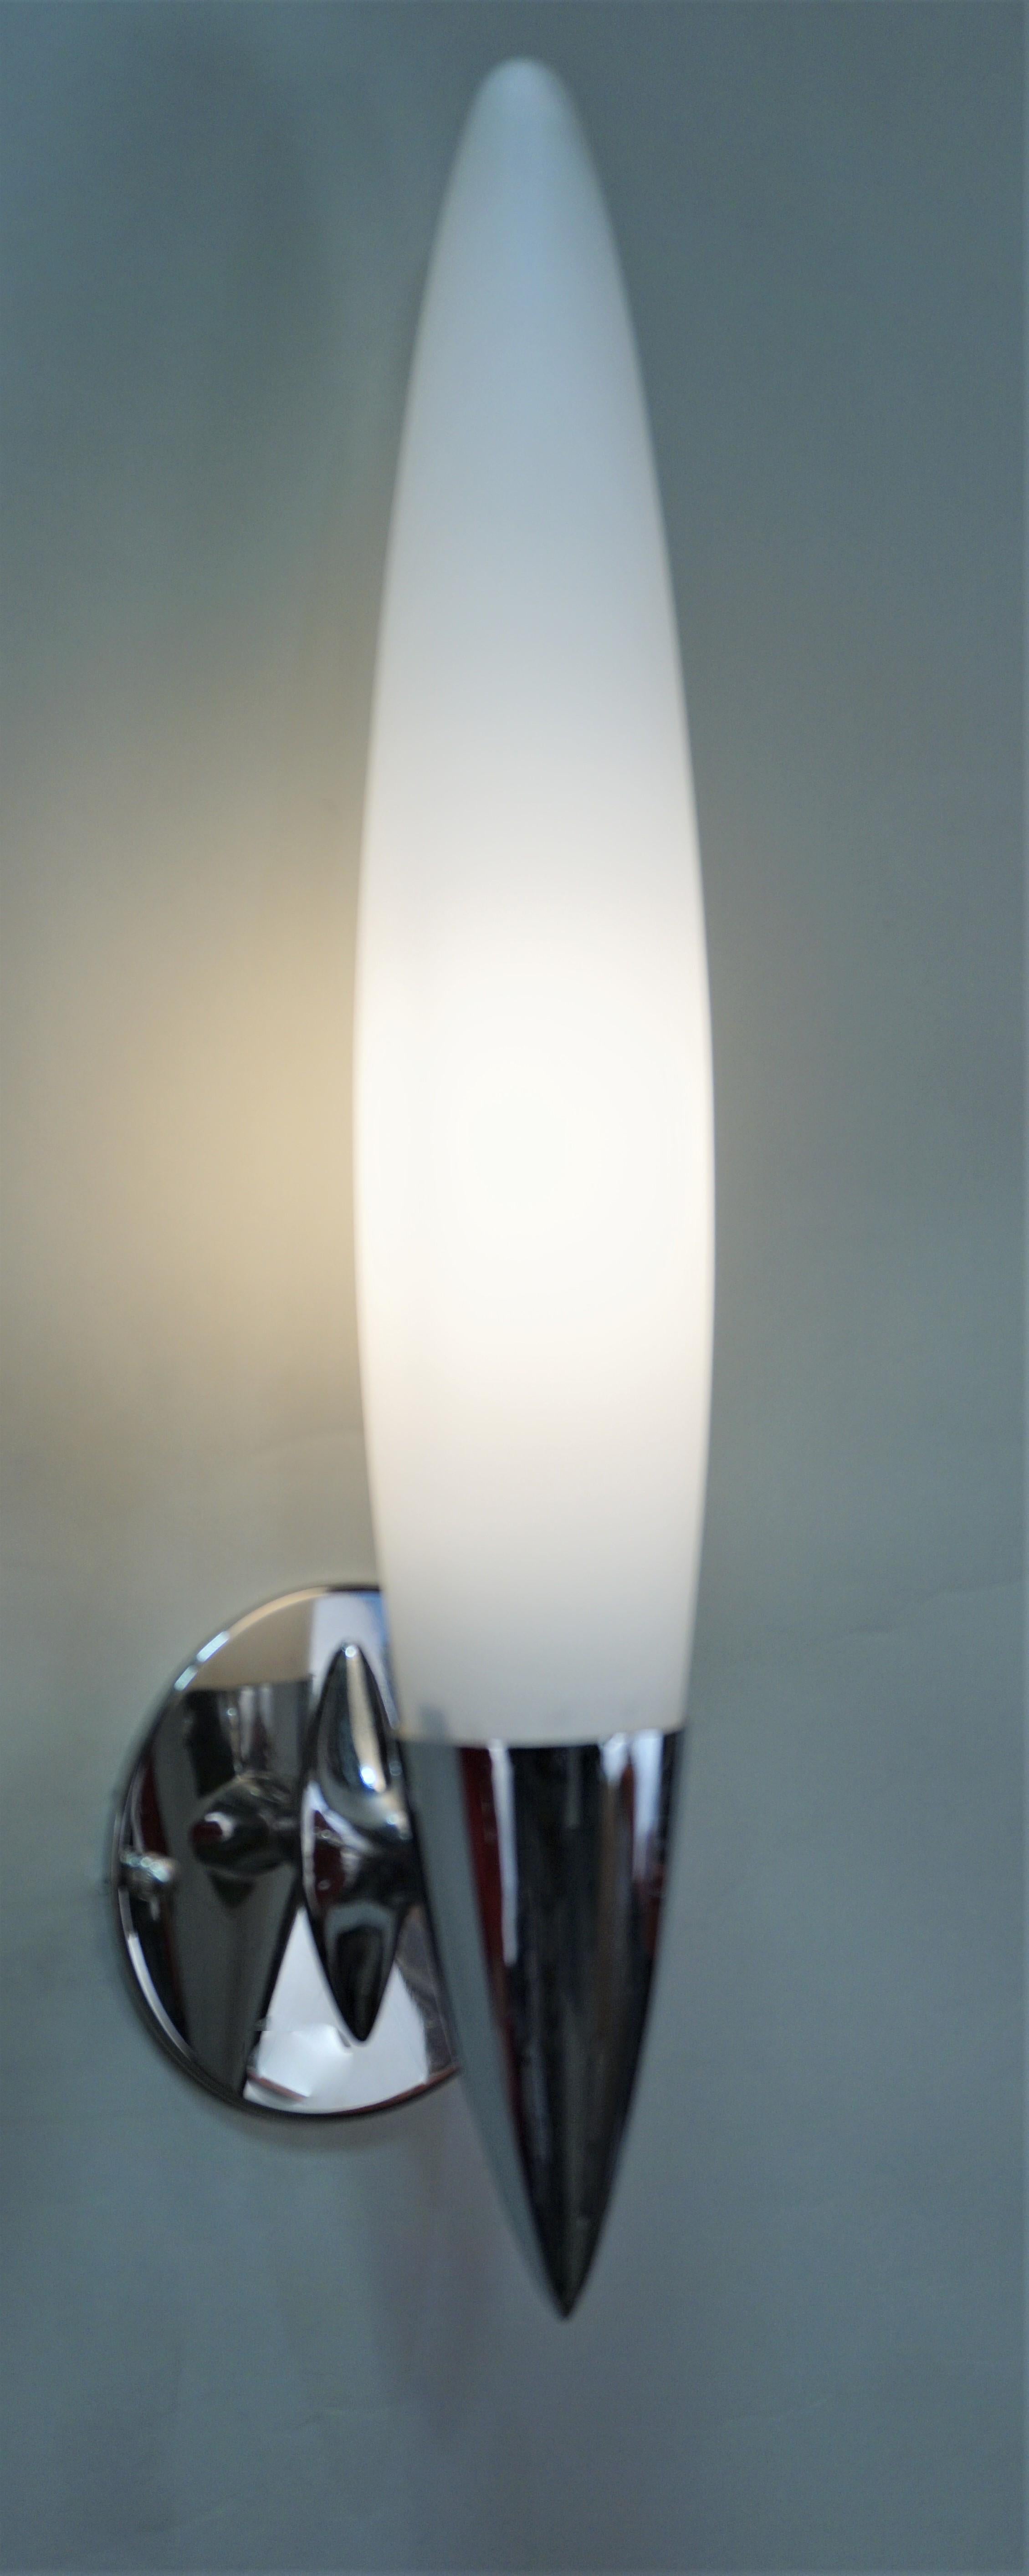 Simple design but very elegant, pair of chrome and opal glass wall sconces.
Measures: Back plate is 4.5